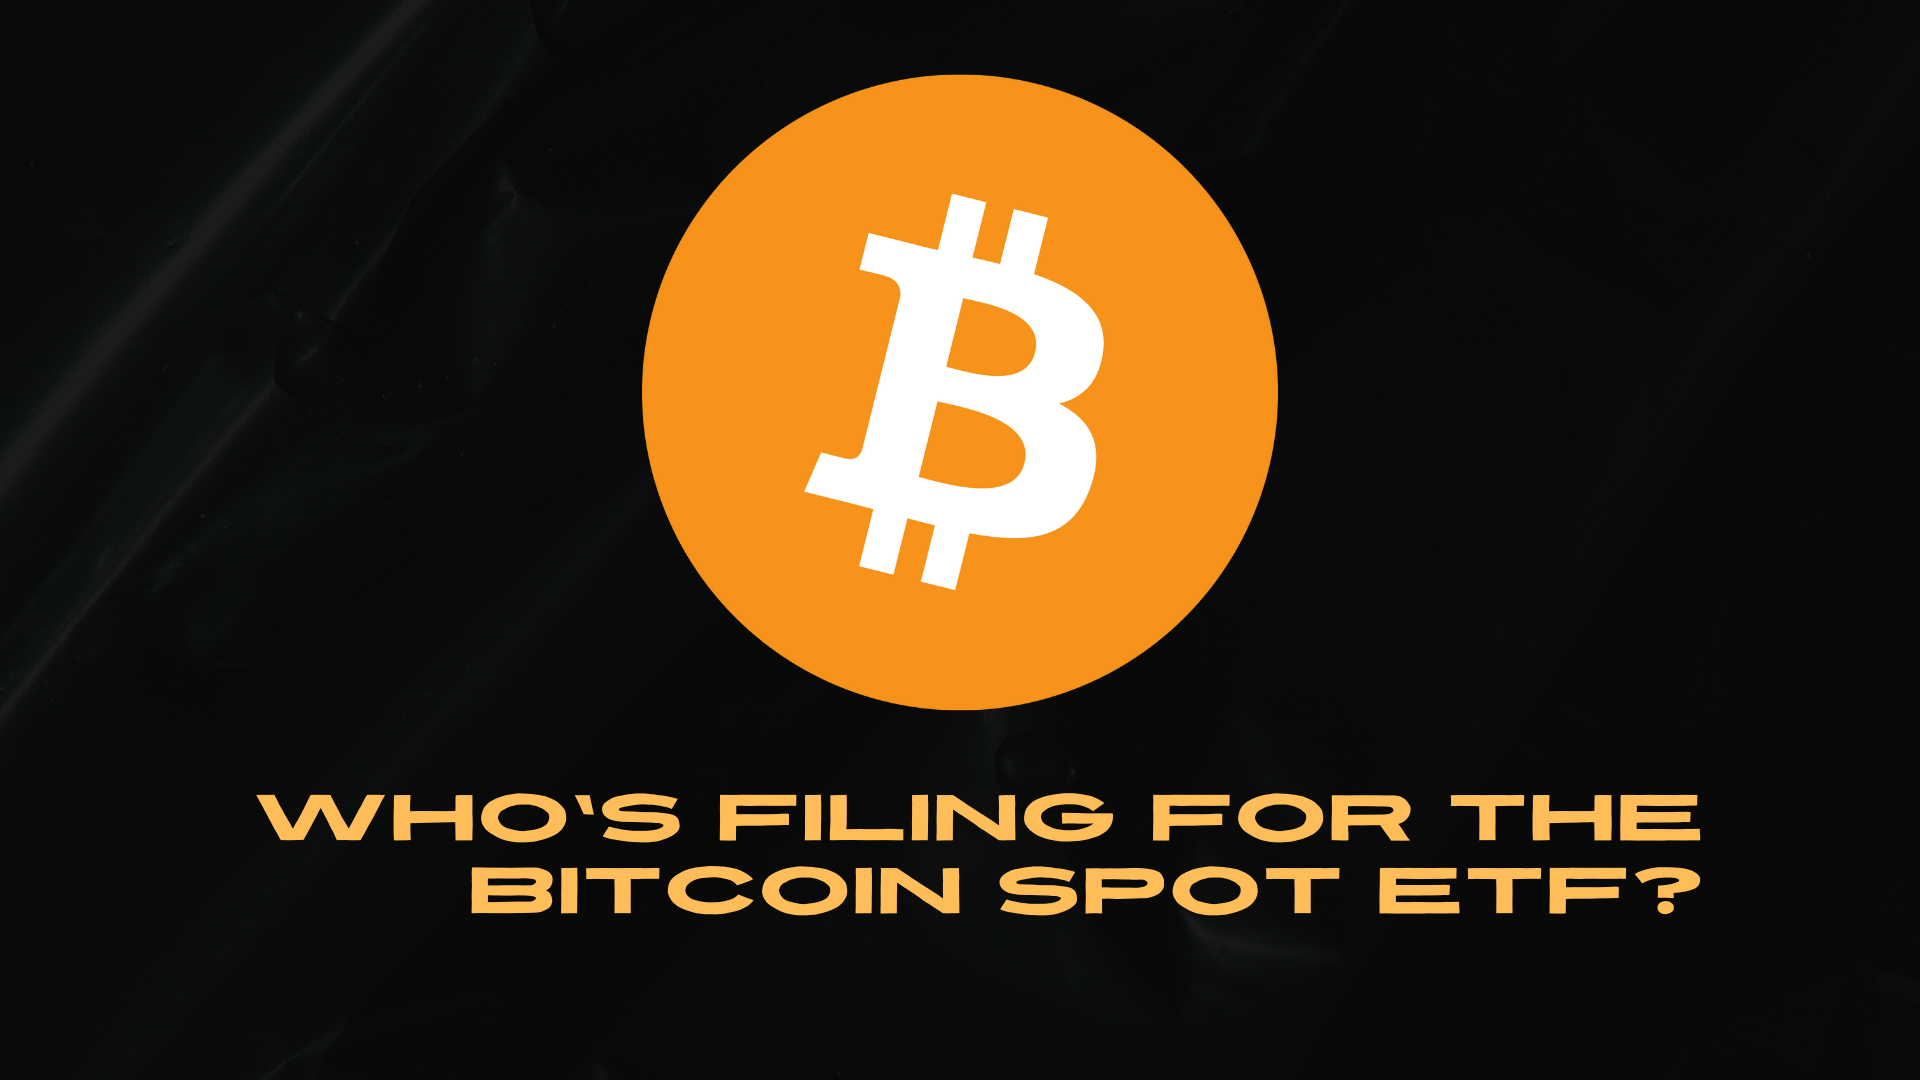 Who's filing for the Bitcoin spot ETF?